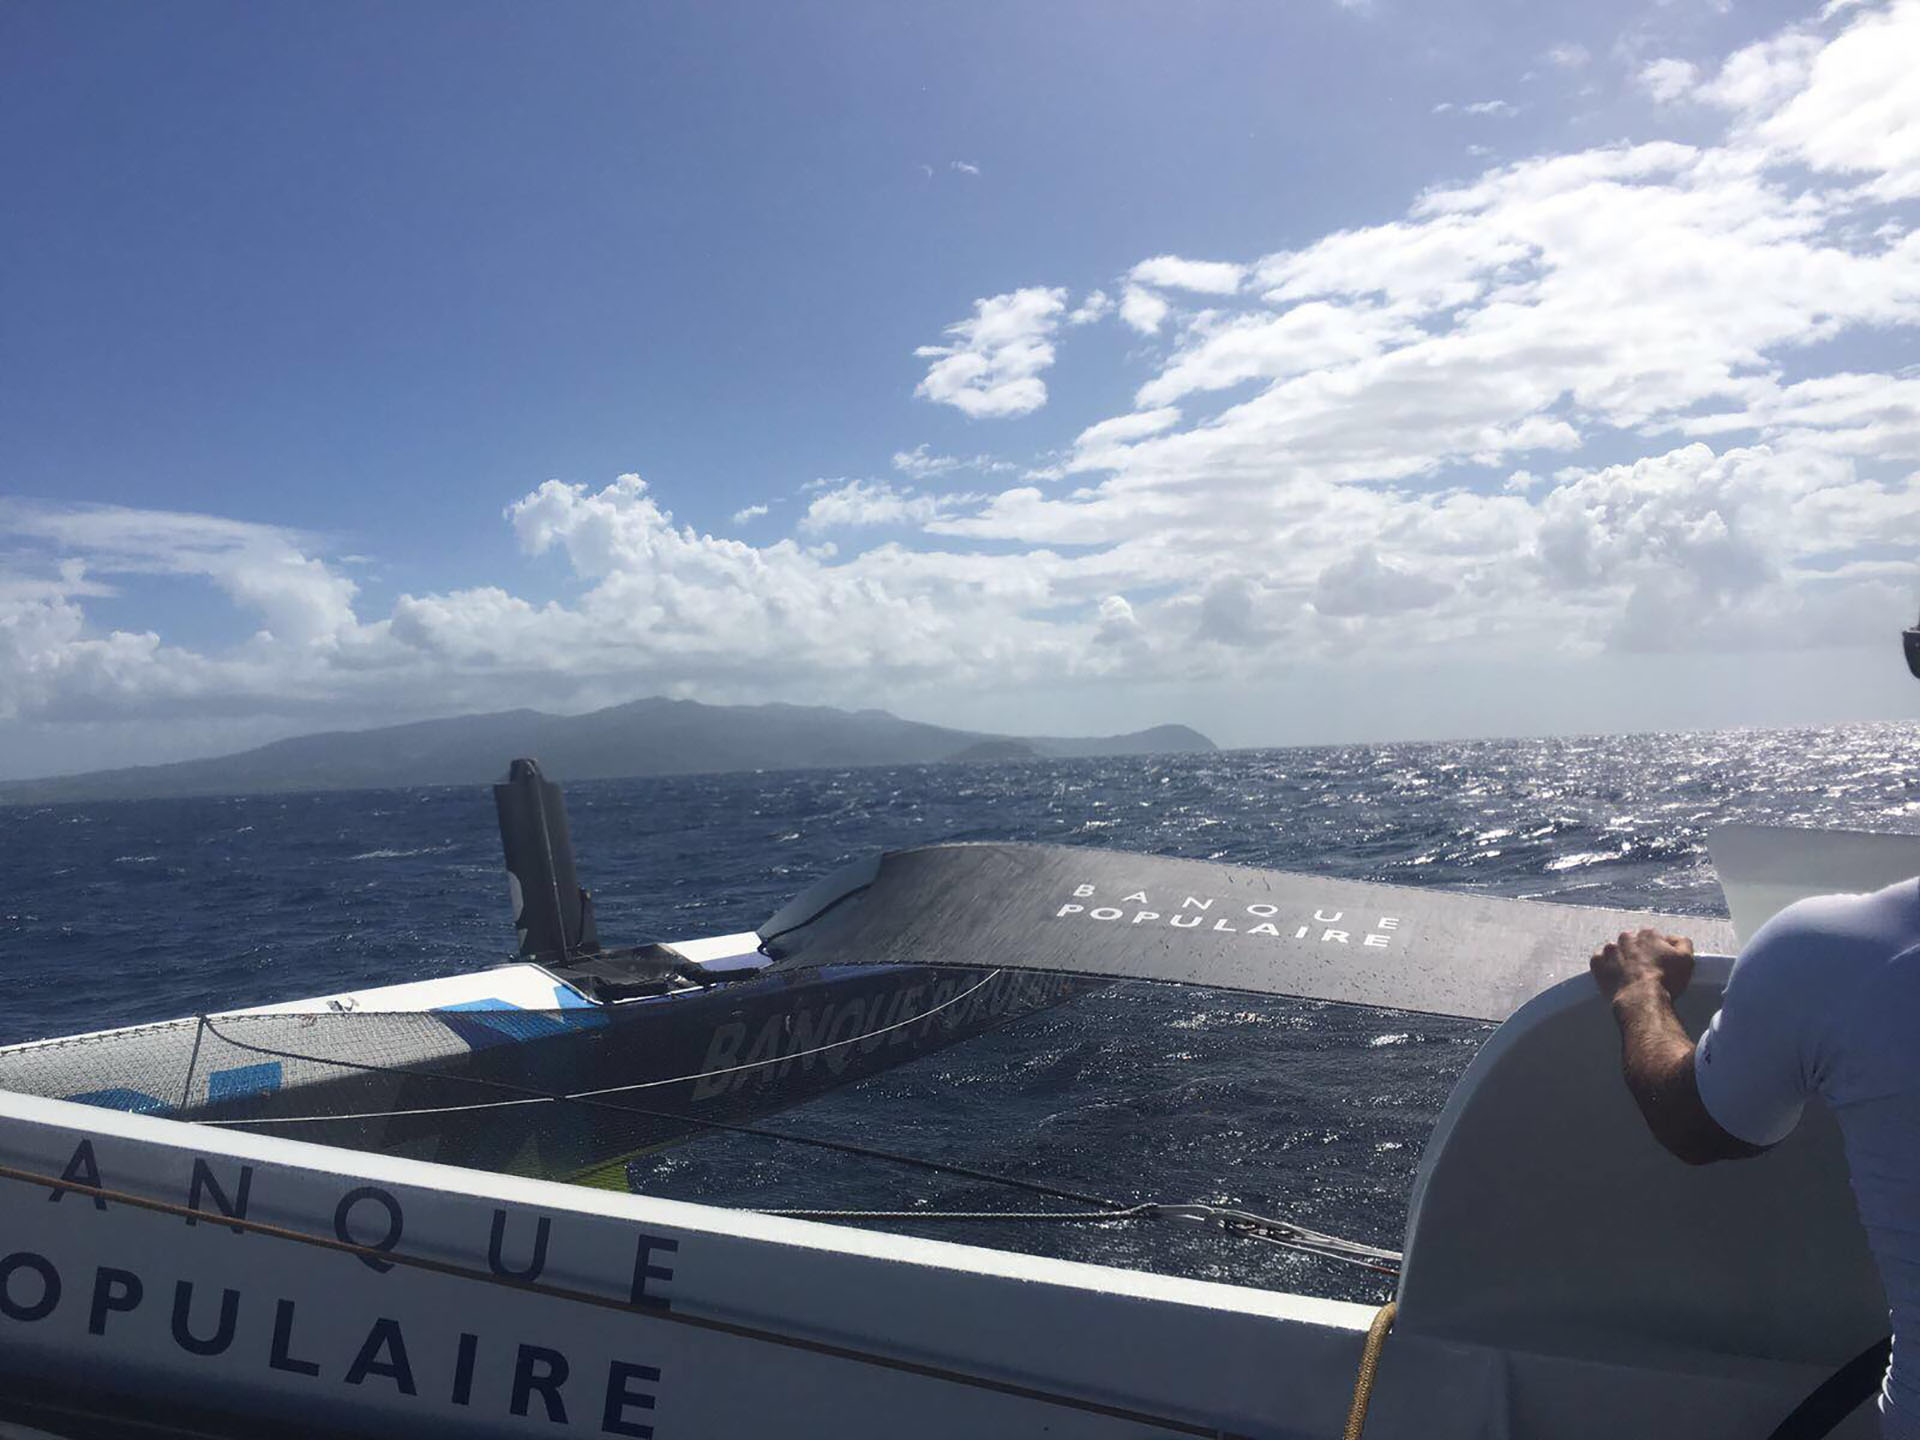  Transatlantic Record  'Banque Populaire IX' arrived in the Caribbeans after 6 days